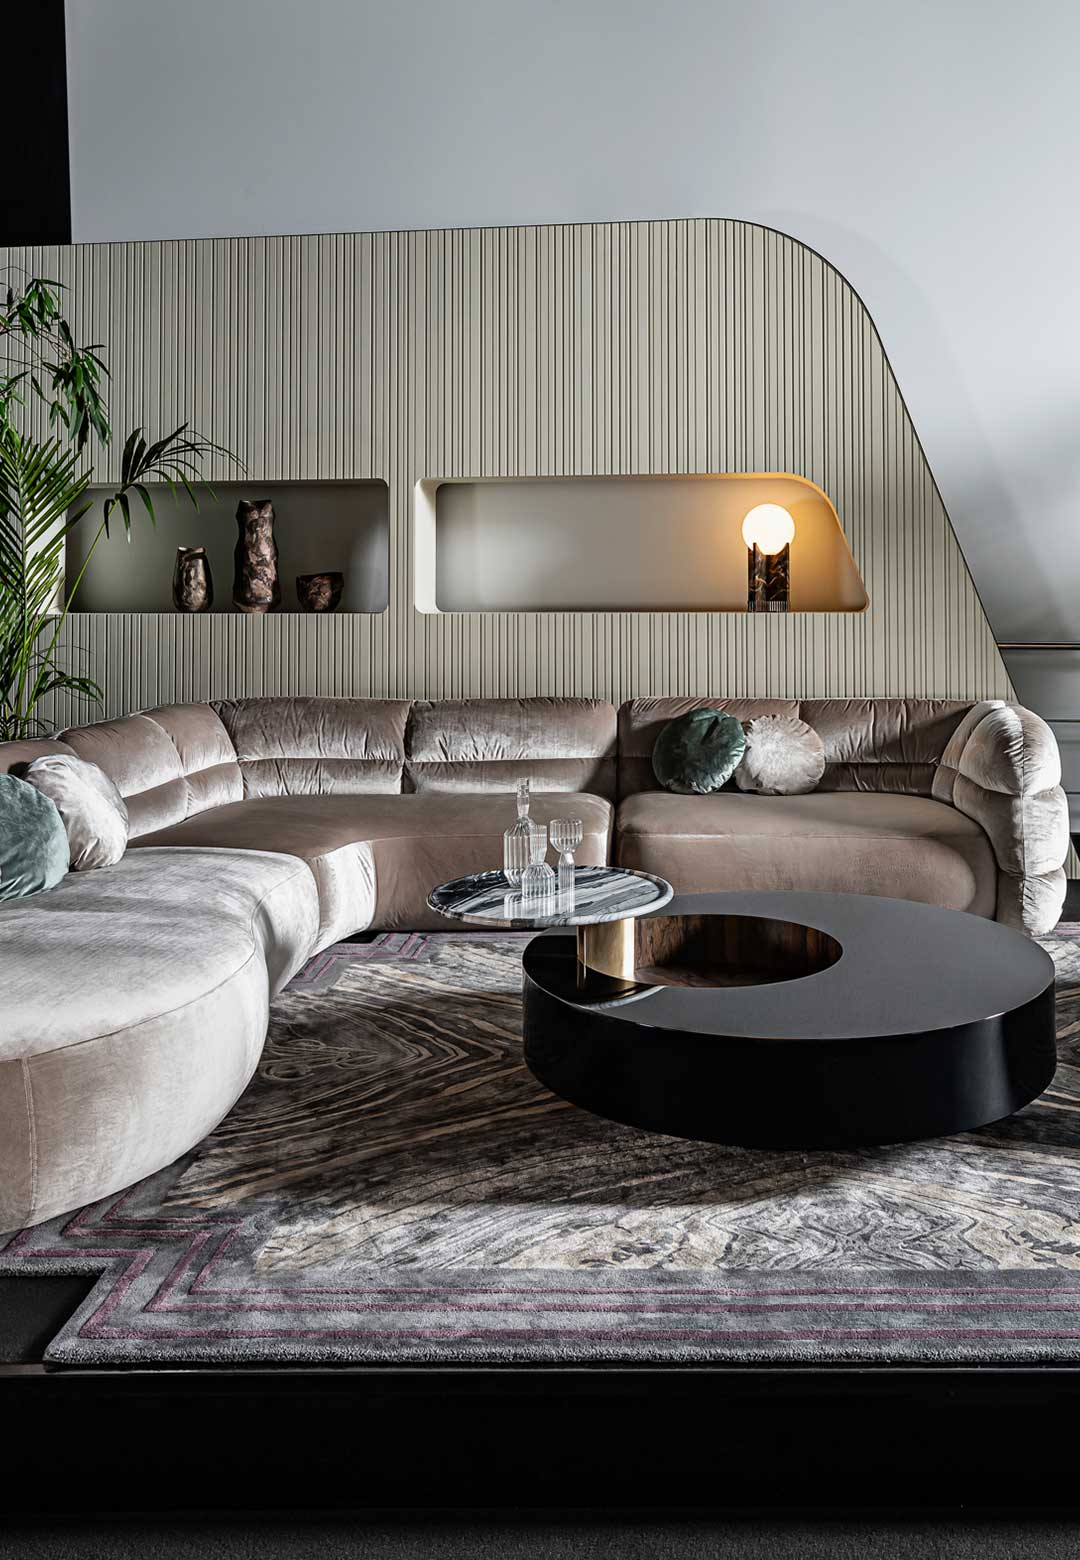 Italian Meta Luxury brand Visionnaire introduces its Volare Collection